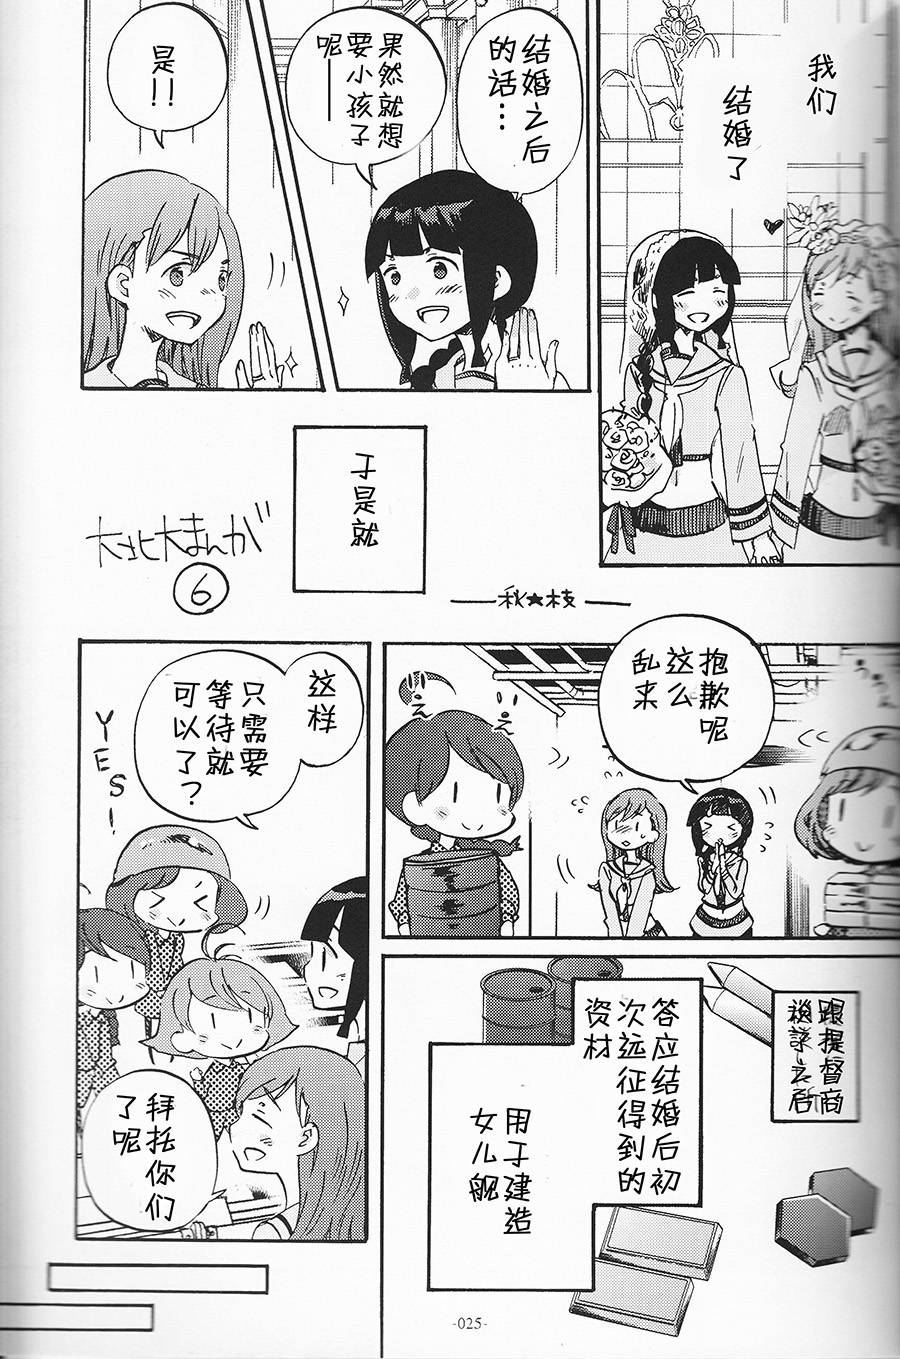 【t pases on good terms every day】漫画-（全一话）章节漫画下拉式图片-18.jpg